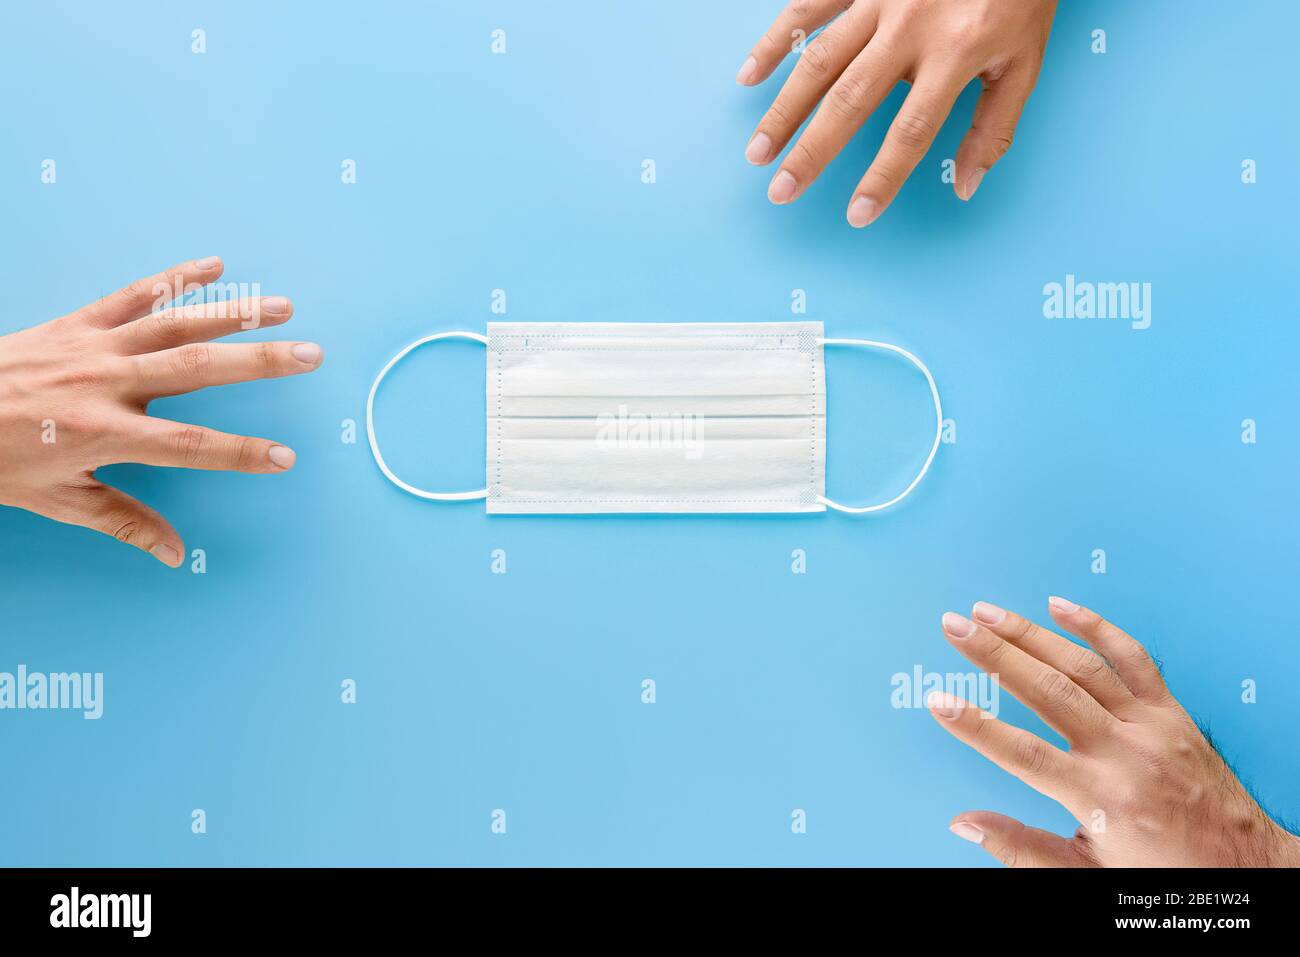 Hands reaching out to get medical face mask to protect from germs and virus during pandemic situation Stock Photo